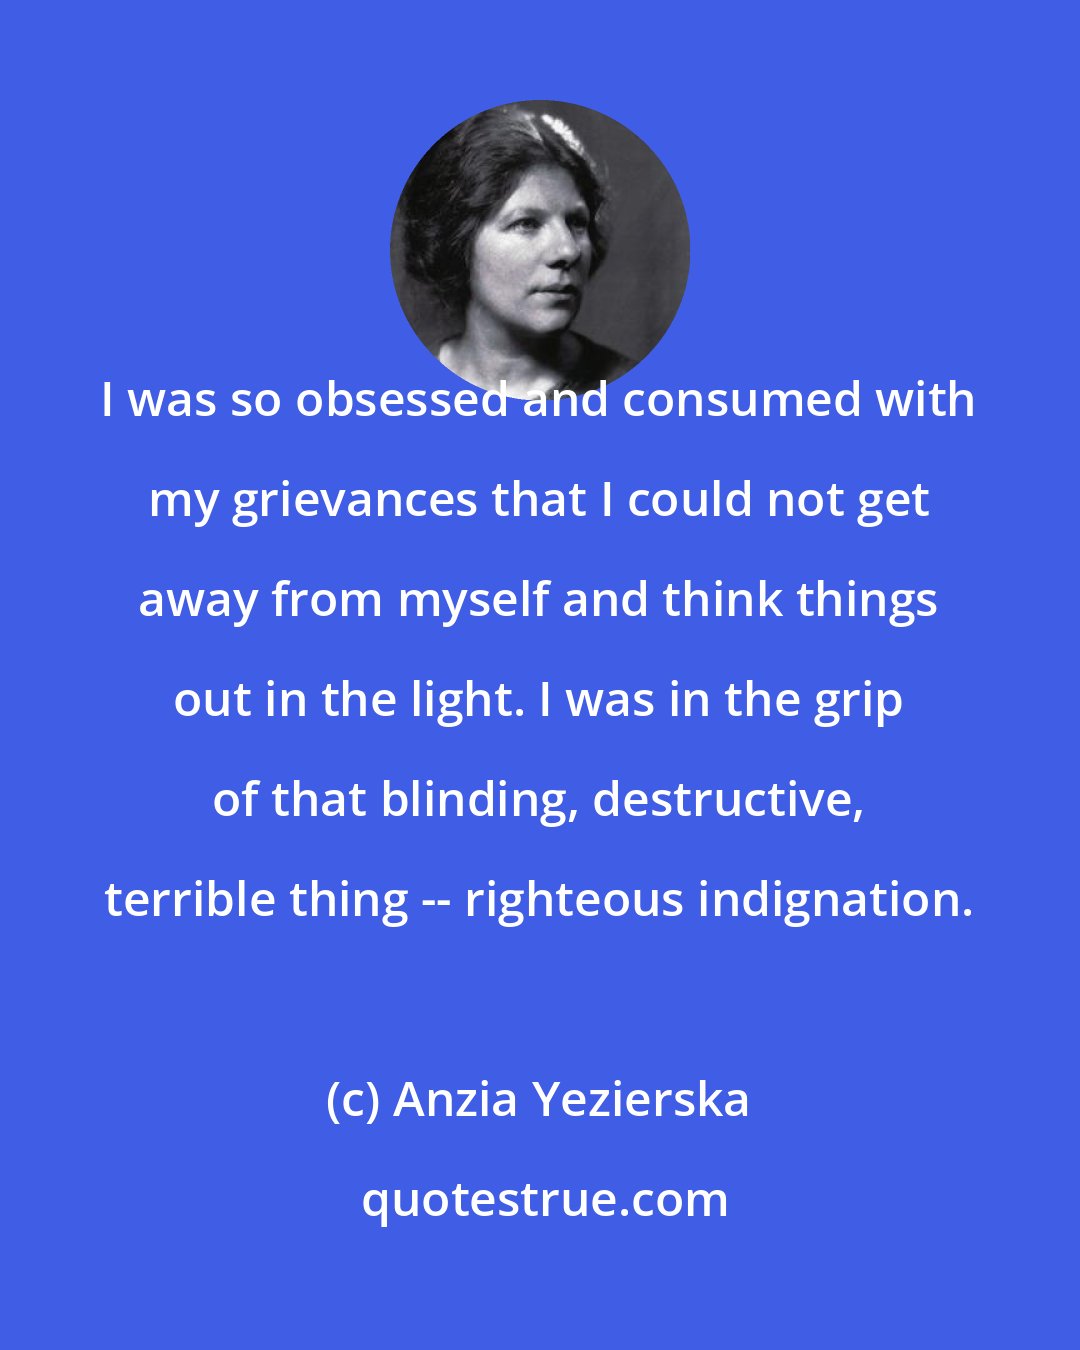 Anzia Yezierska: I was so obsessed and consumed with my grievances that I could not get away from myself and think things out in the light. I was in the grip of that blinding, destructive, terrible thing -- righteous indignation.